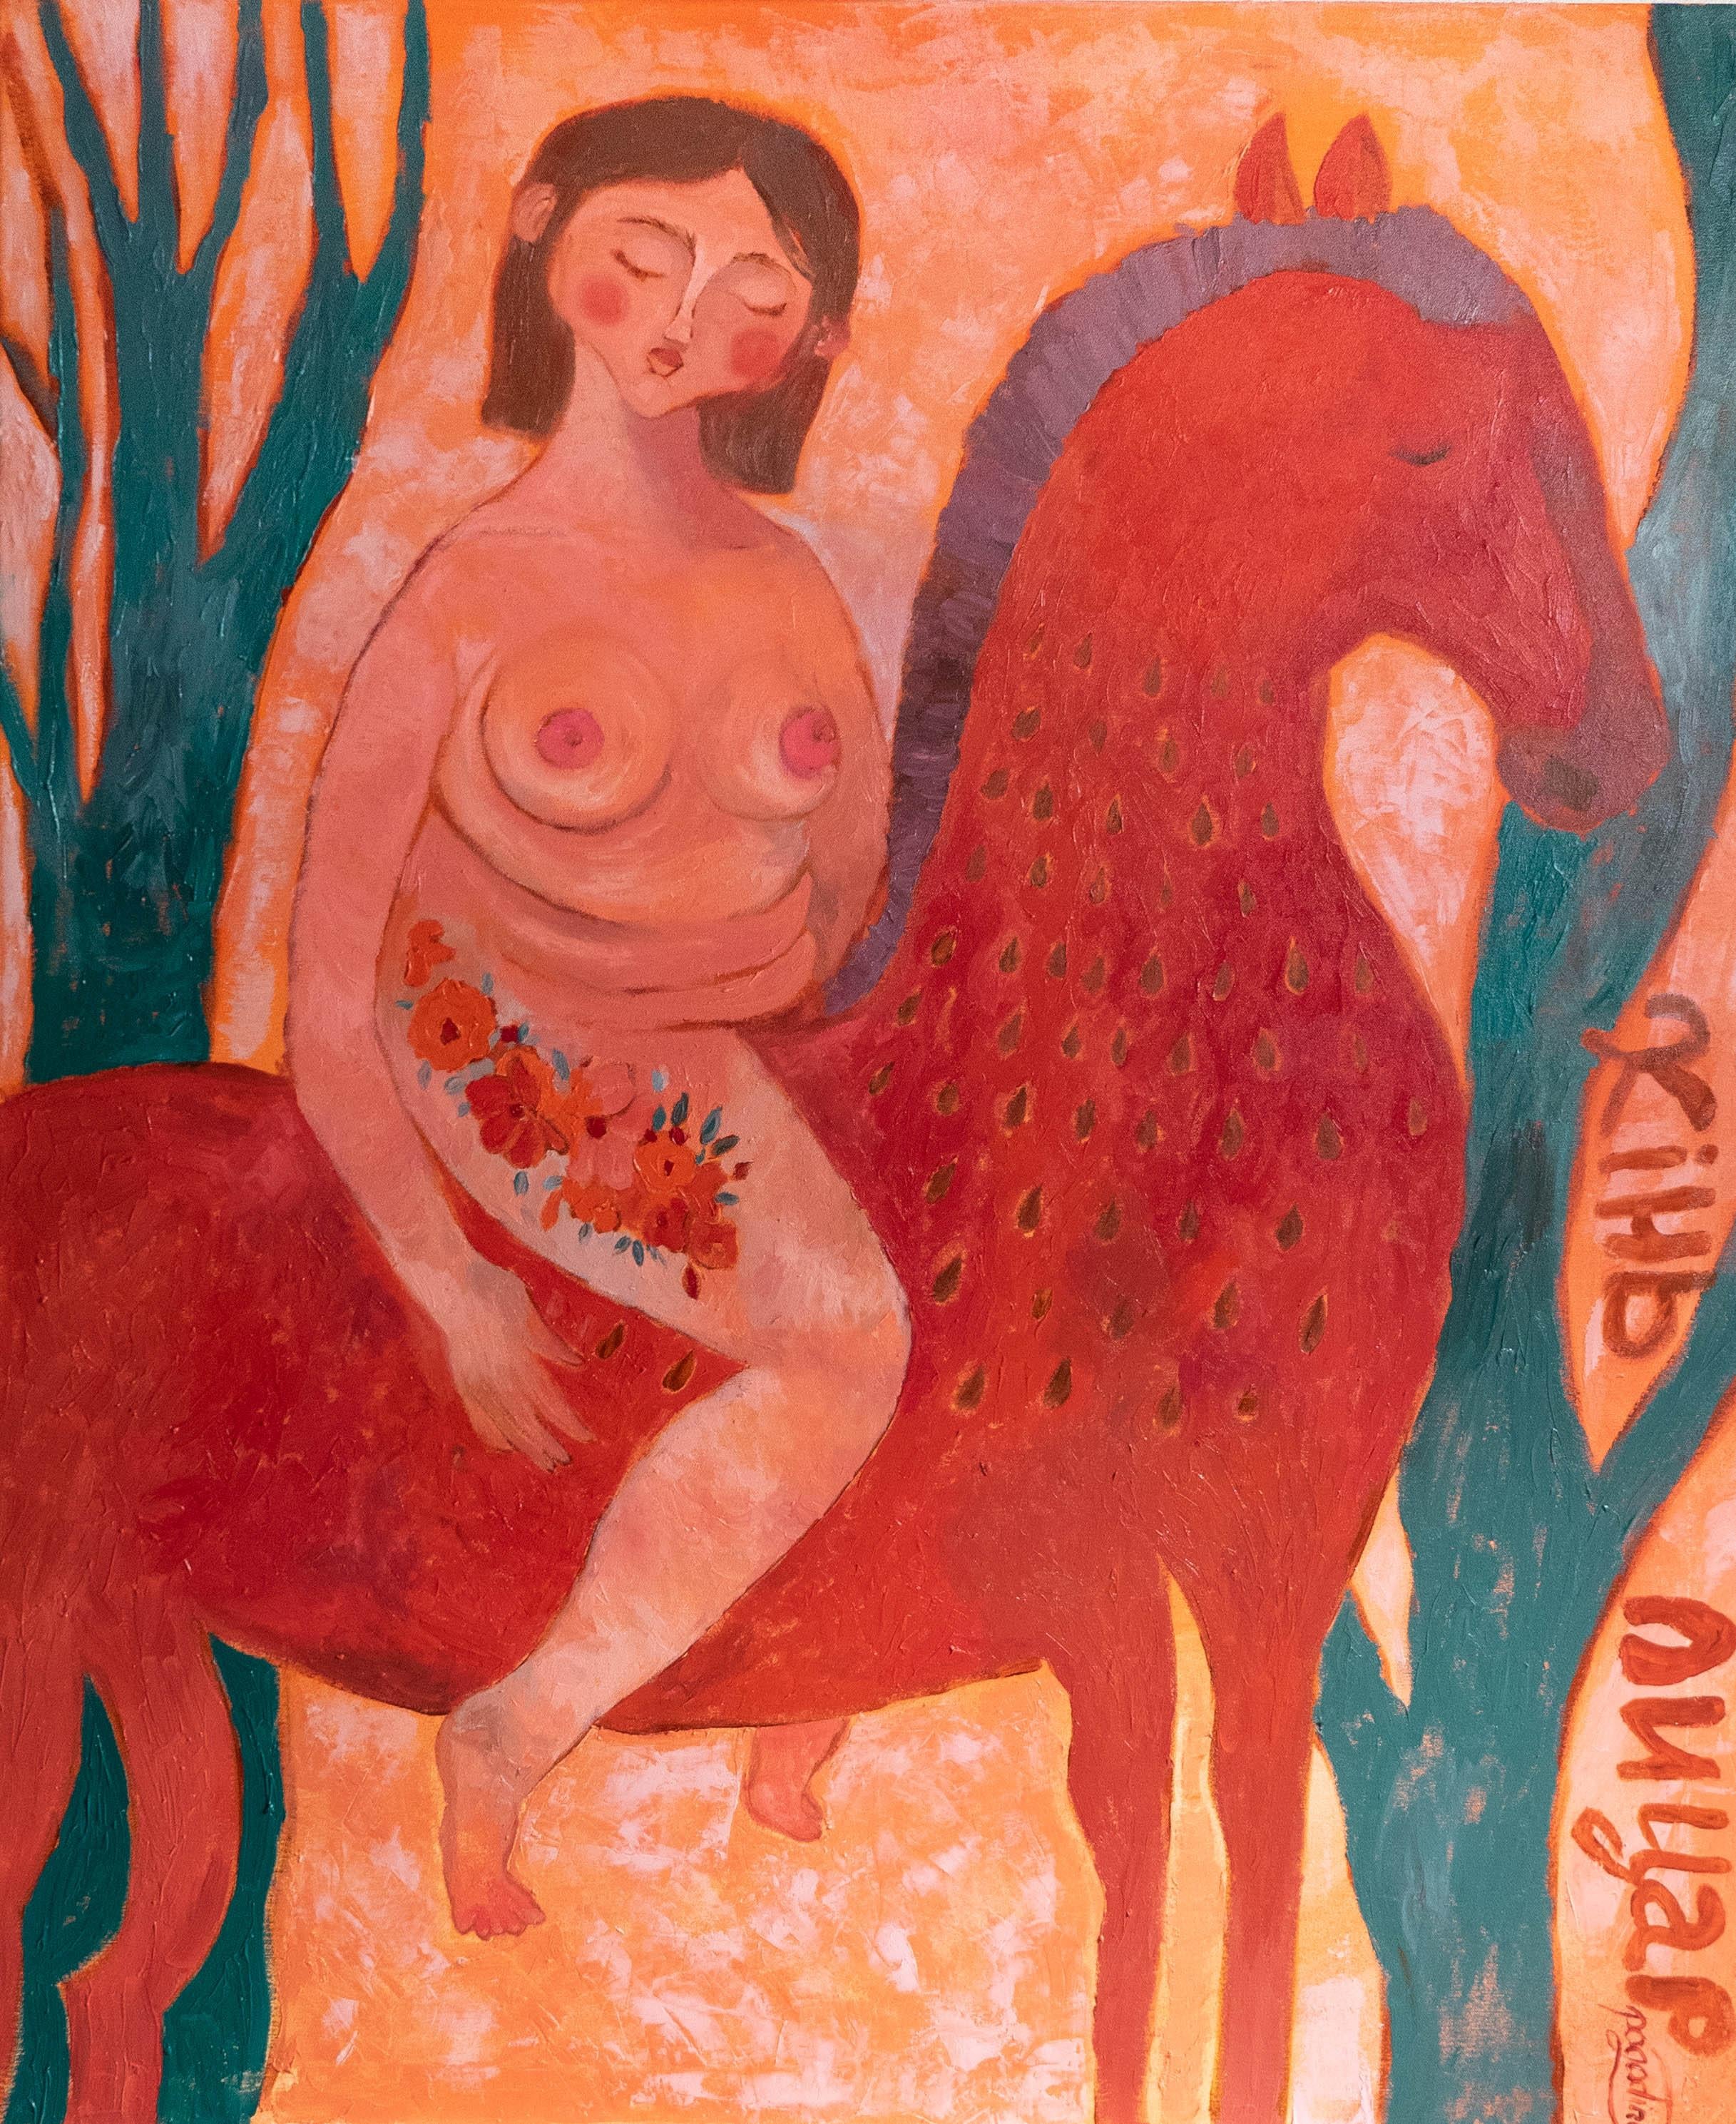 ABOUT THE ARTWORK

"I Have the Horse. Am I a Knight?" weaves a narrative of self-inquiry and identity. The central figure, a woman astride a majestic horse, is painted with warm, earthy hues of terra cotta and burnt sienna that bring forth her